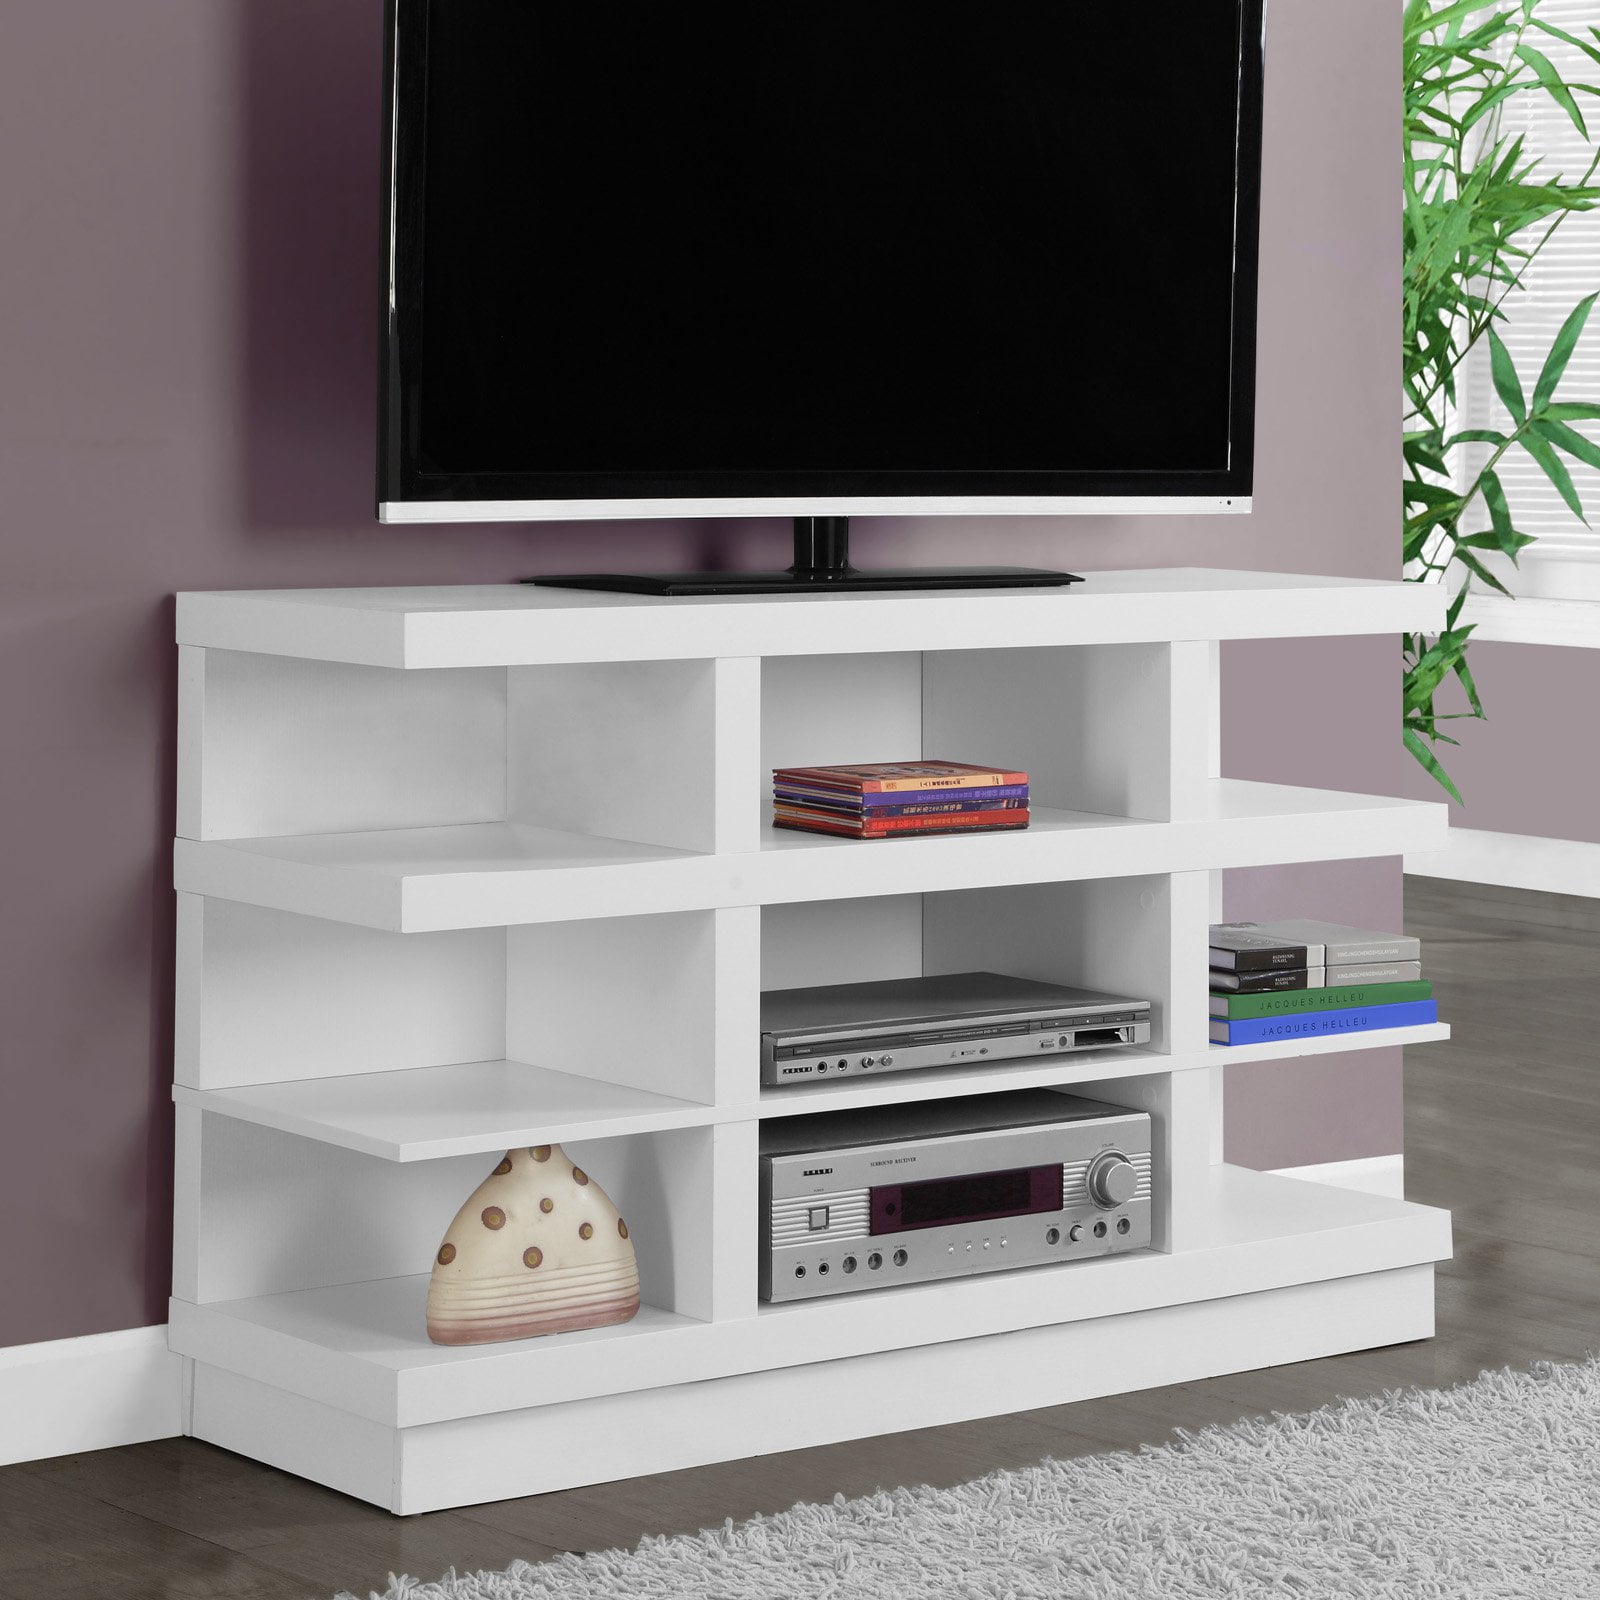 Monarch Tv Stand White For TVs Up To 48"L - Walmart.com ...